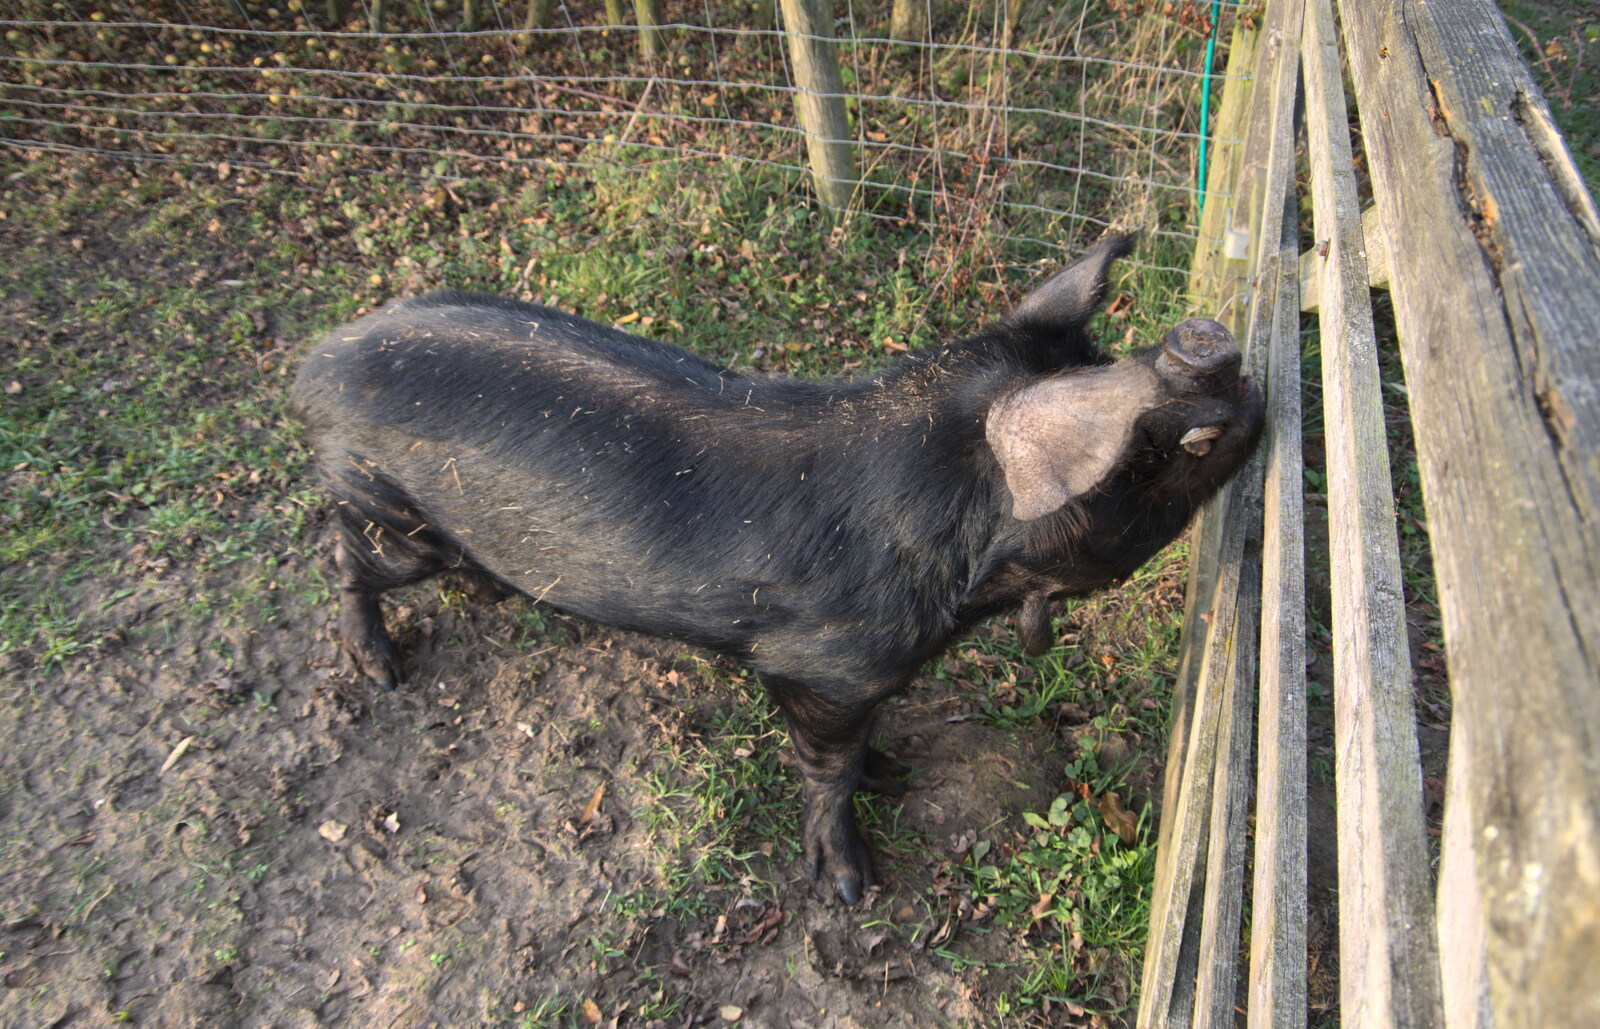 The hairy pig sticks his snout in the air from To See the Hairy Pigs, Thrandeston, Suffolk - 7th November 2020